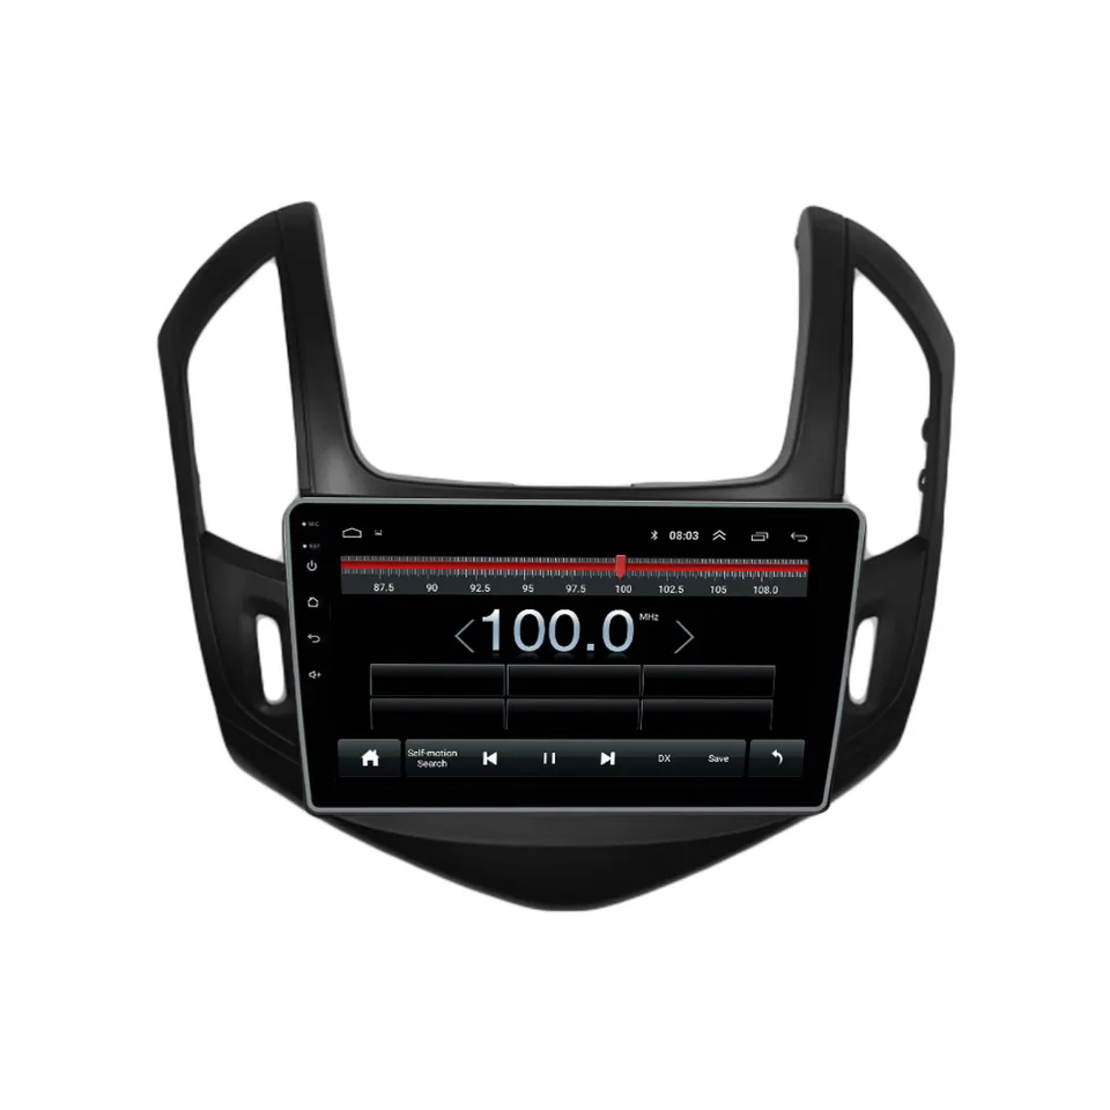 Chevrolet Cruze 2008-2015 Android Multimedia/Navigation